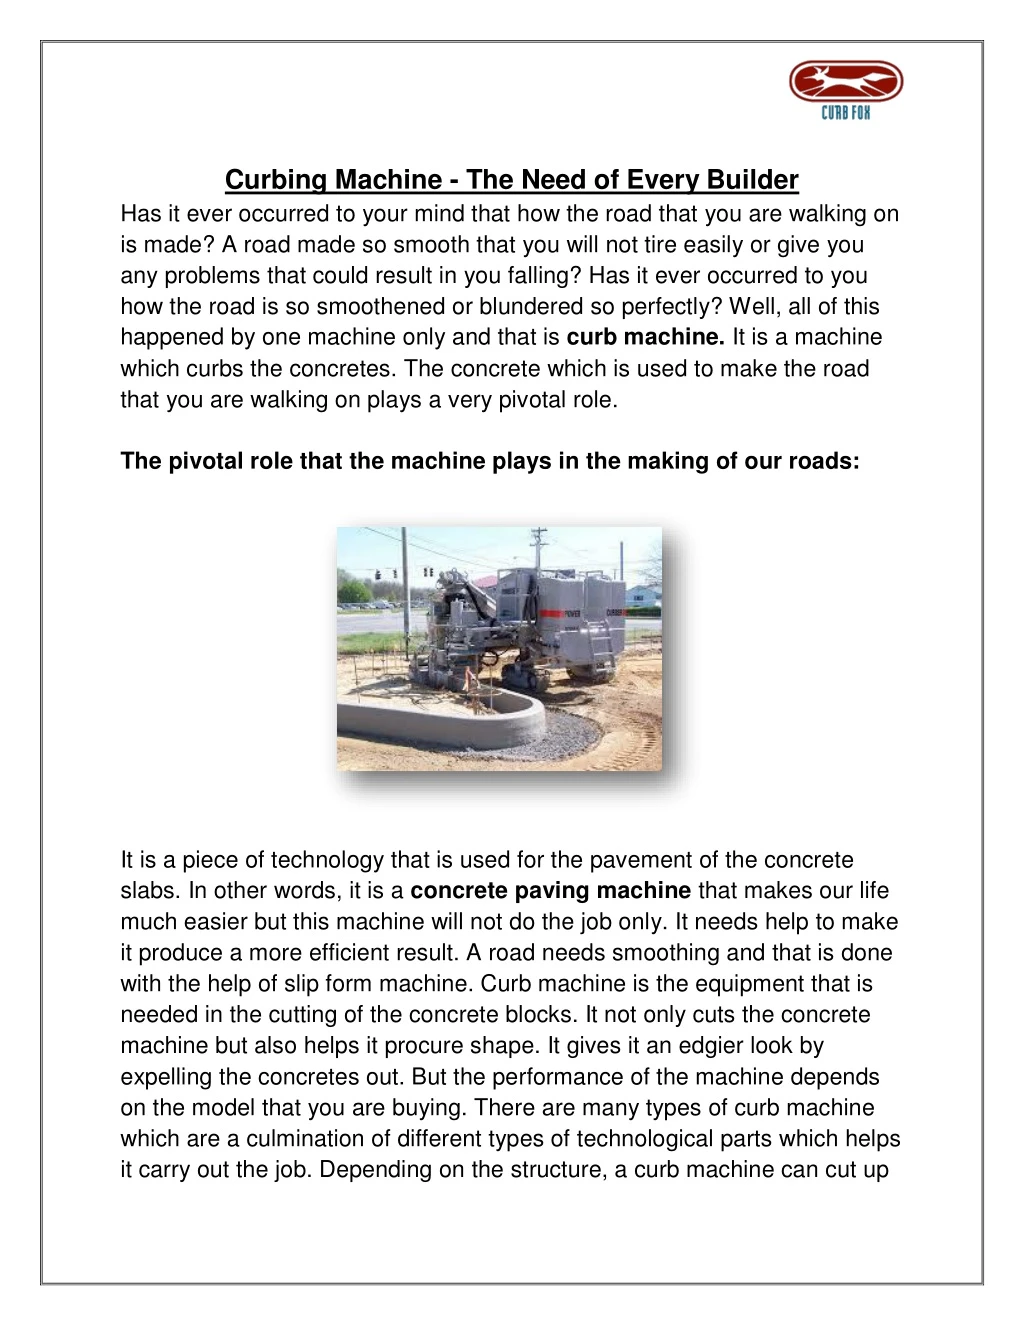 curbing machine the need of every builder